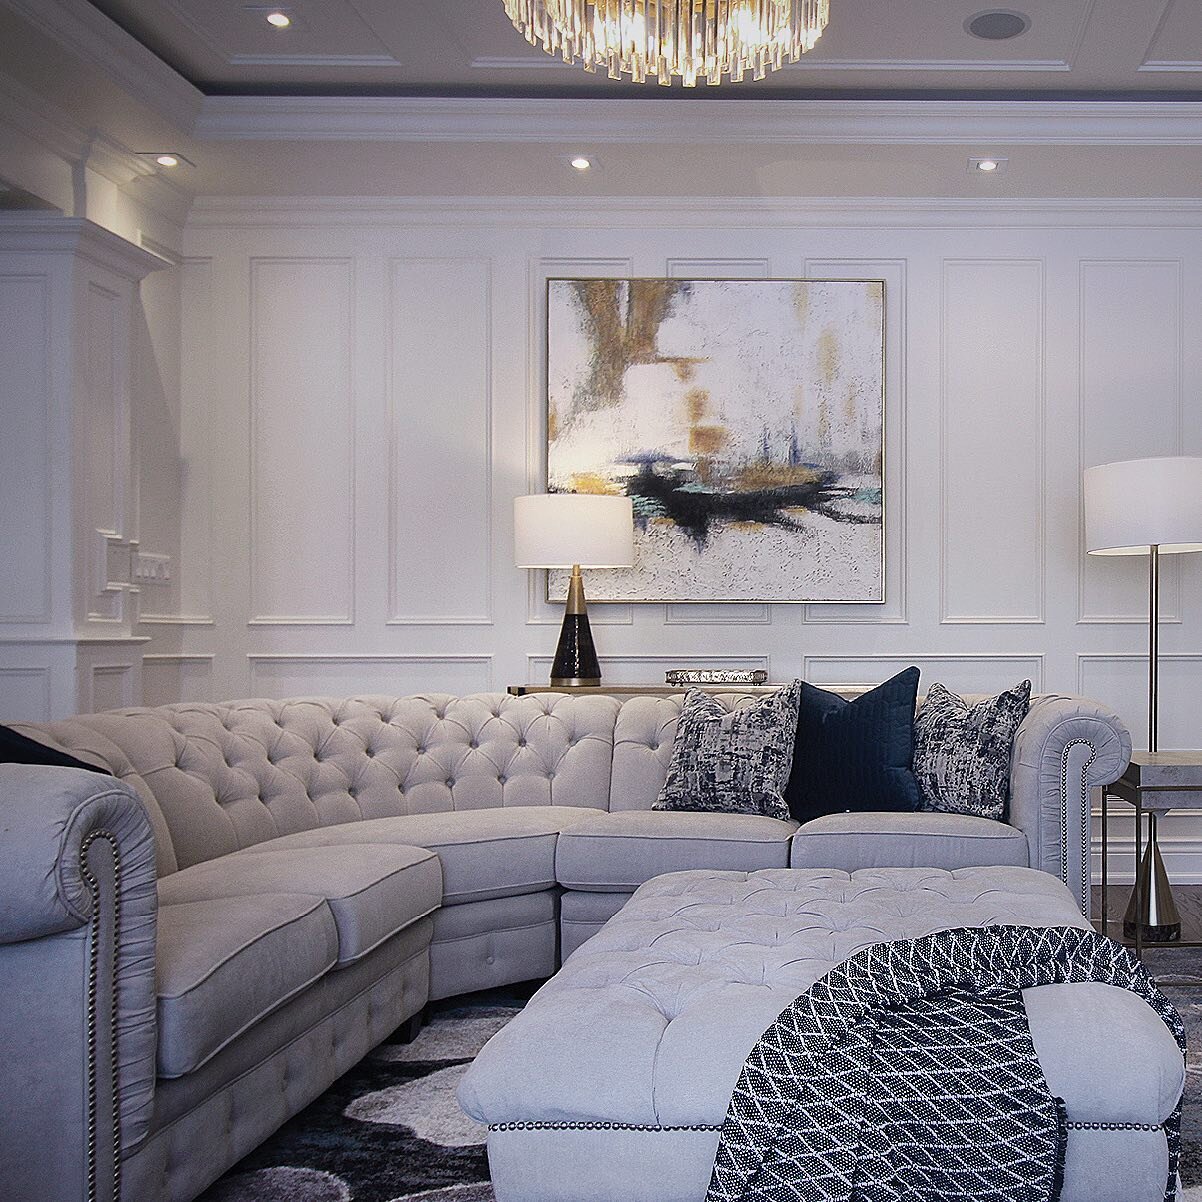 The perfect blend of comfort, style and sophisticated details. Luxury should always be this comfortable.
.

.
.
. #rainesdesign #rainesinc #niche-design #instadeco #instadesign #instadecor #instahome  #interiordesign #homedesign #torontolife #home-de